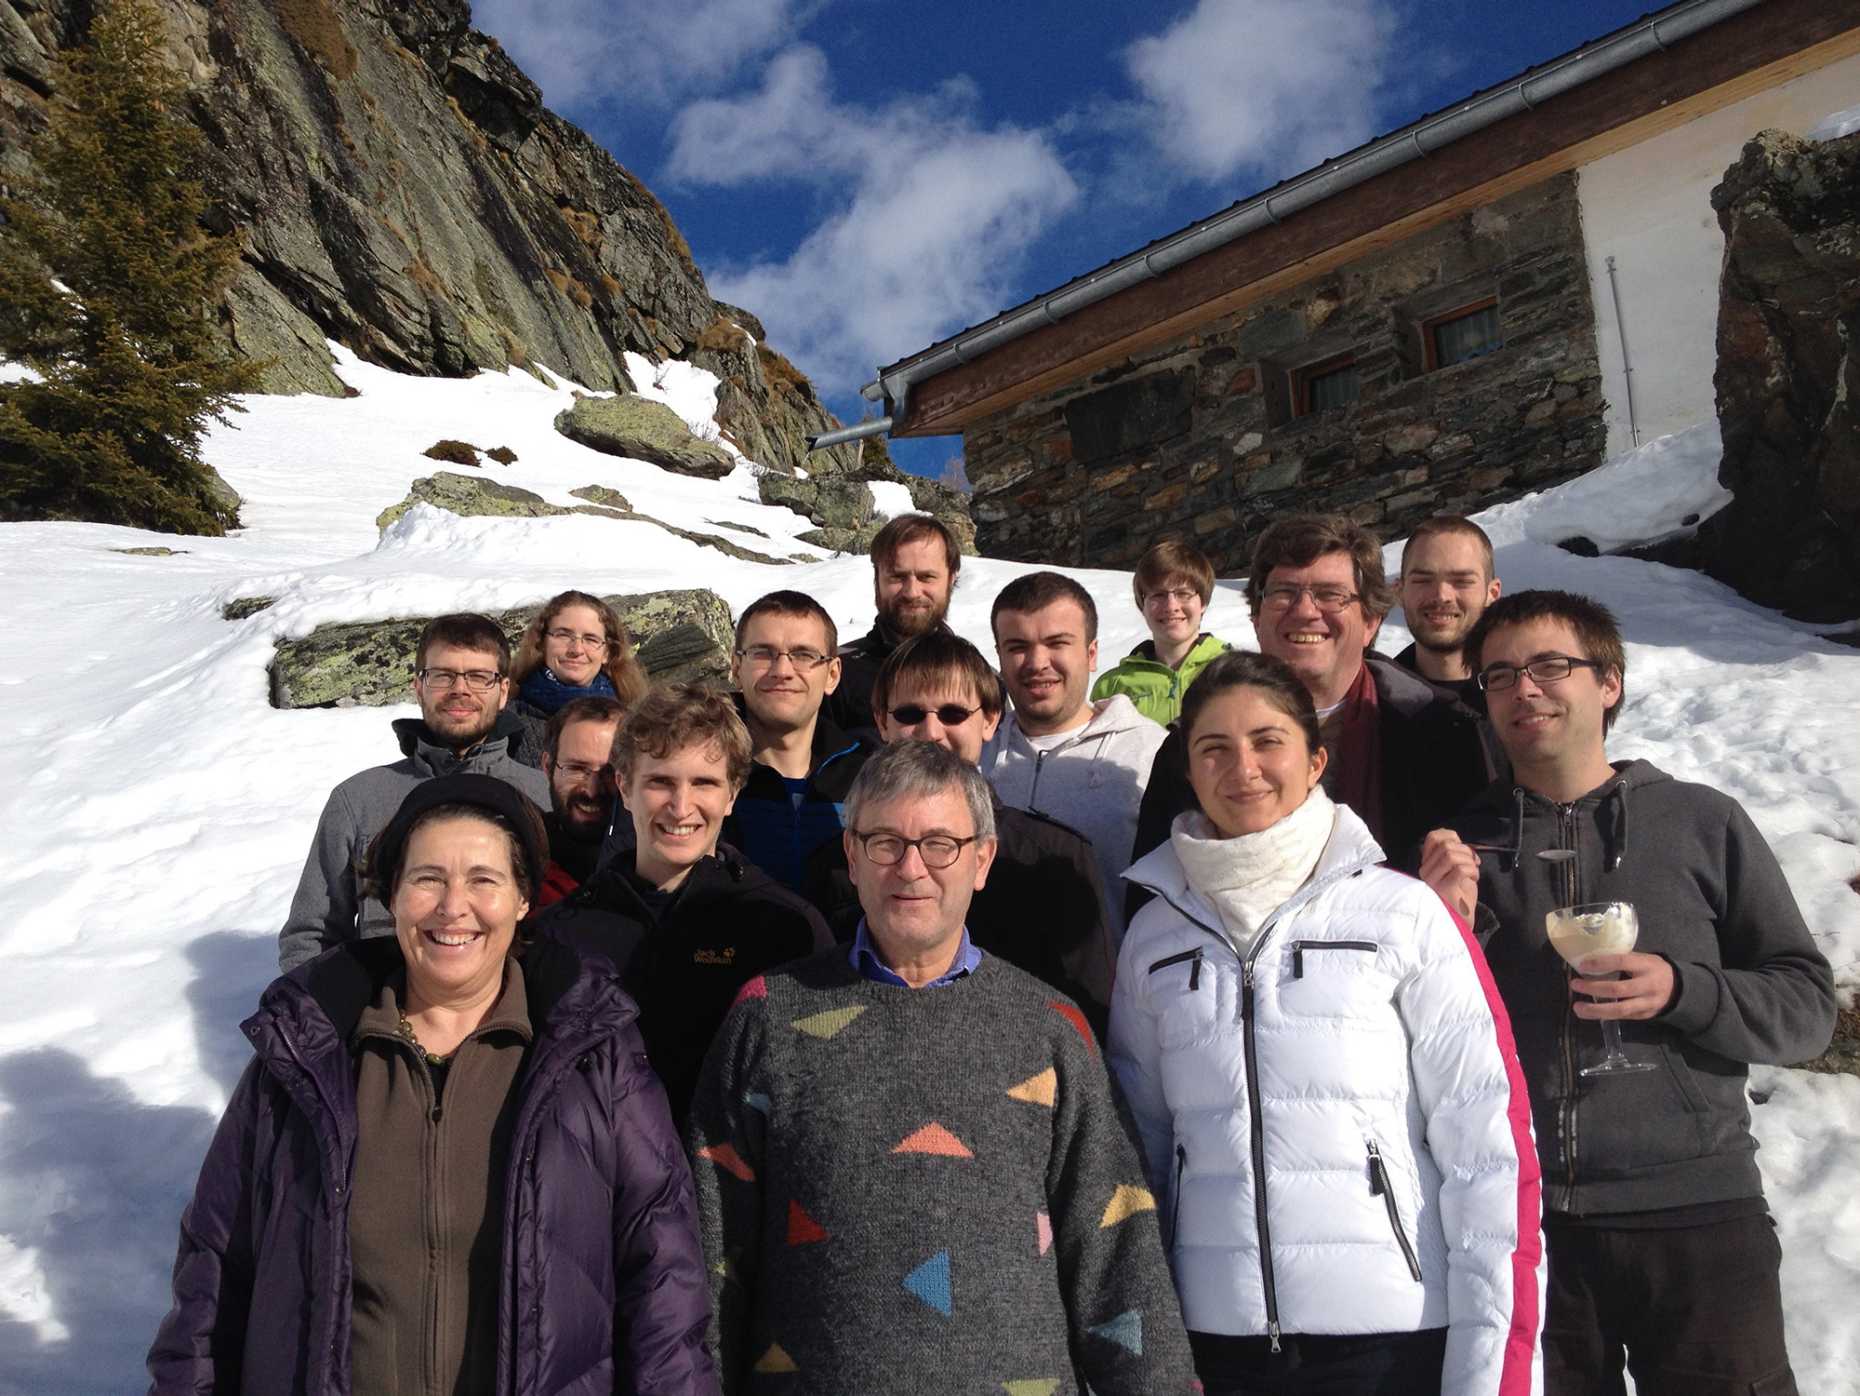 Marianna Berger and the group of Prof. Widmayer in the mountains